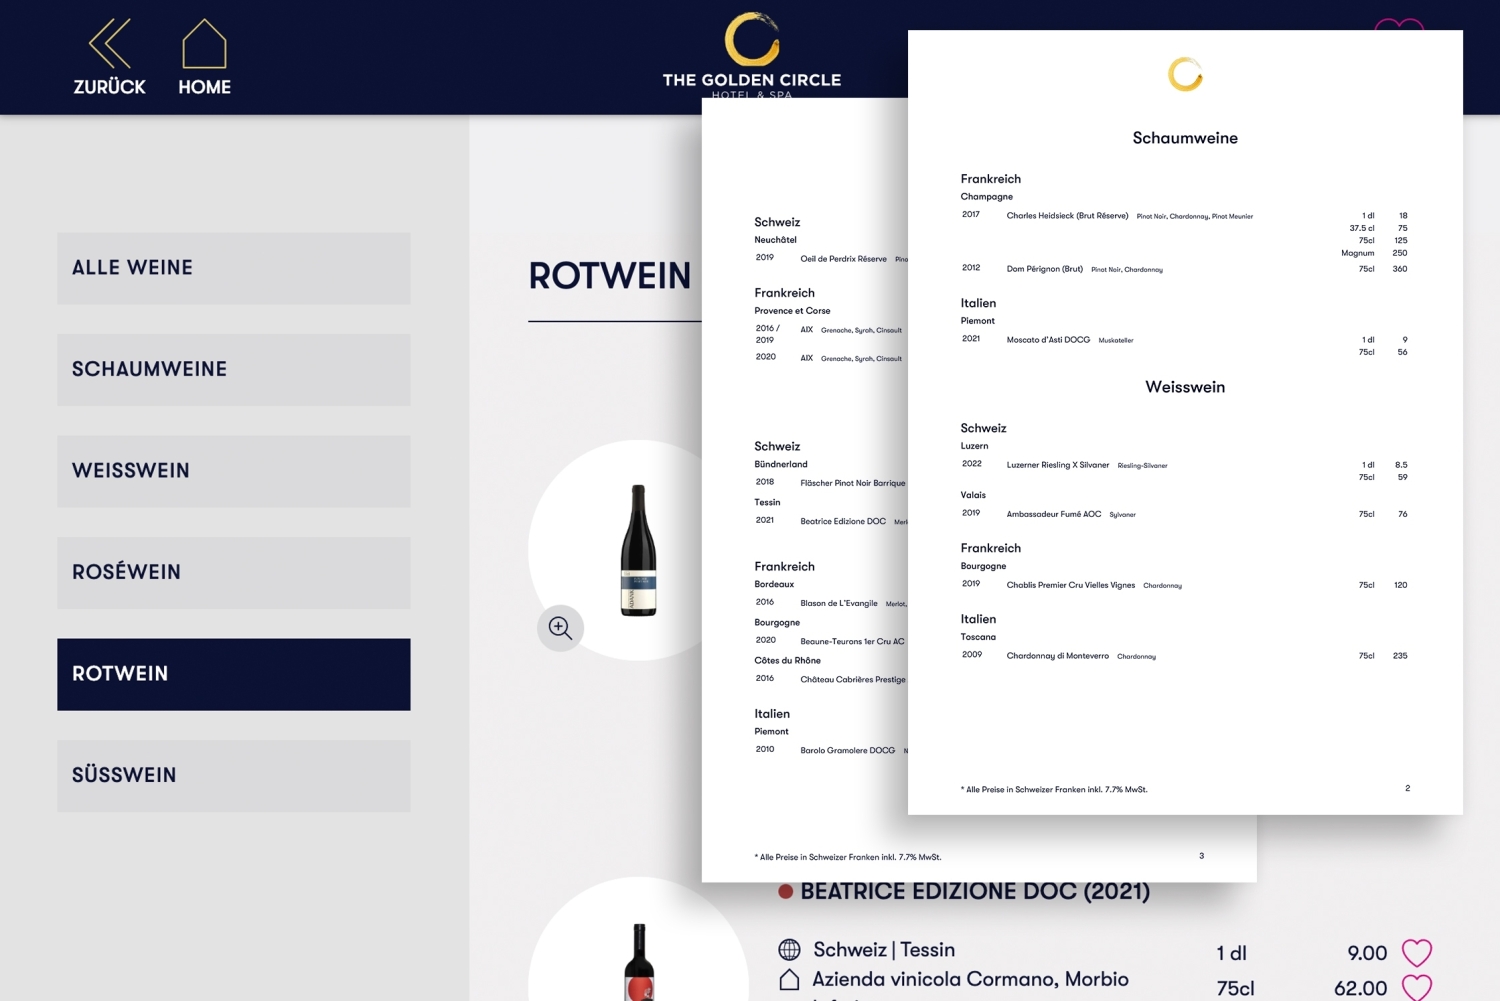 3 - Print customised wine lists directly from the app